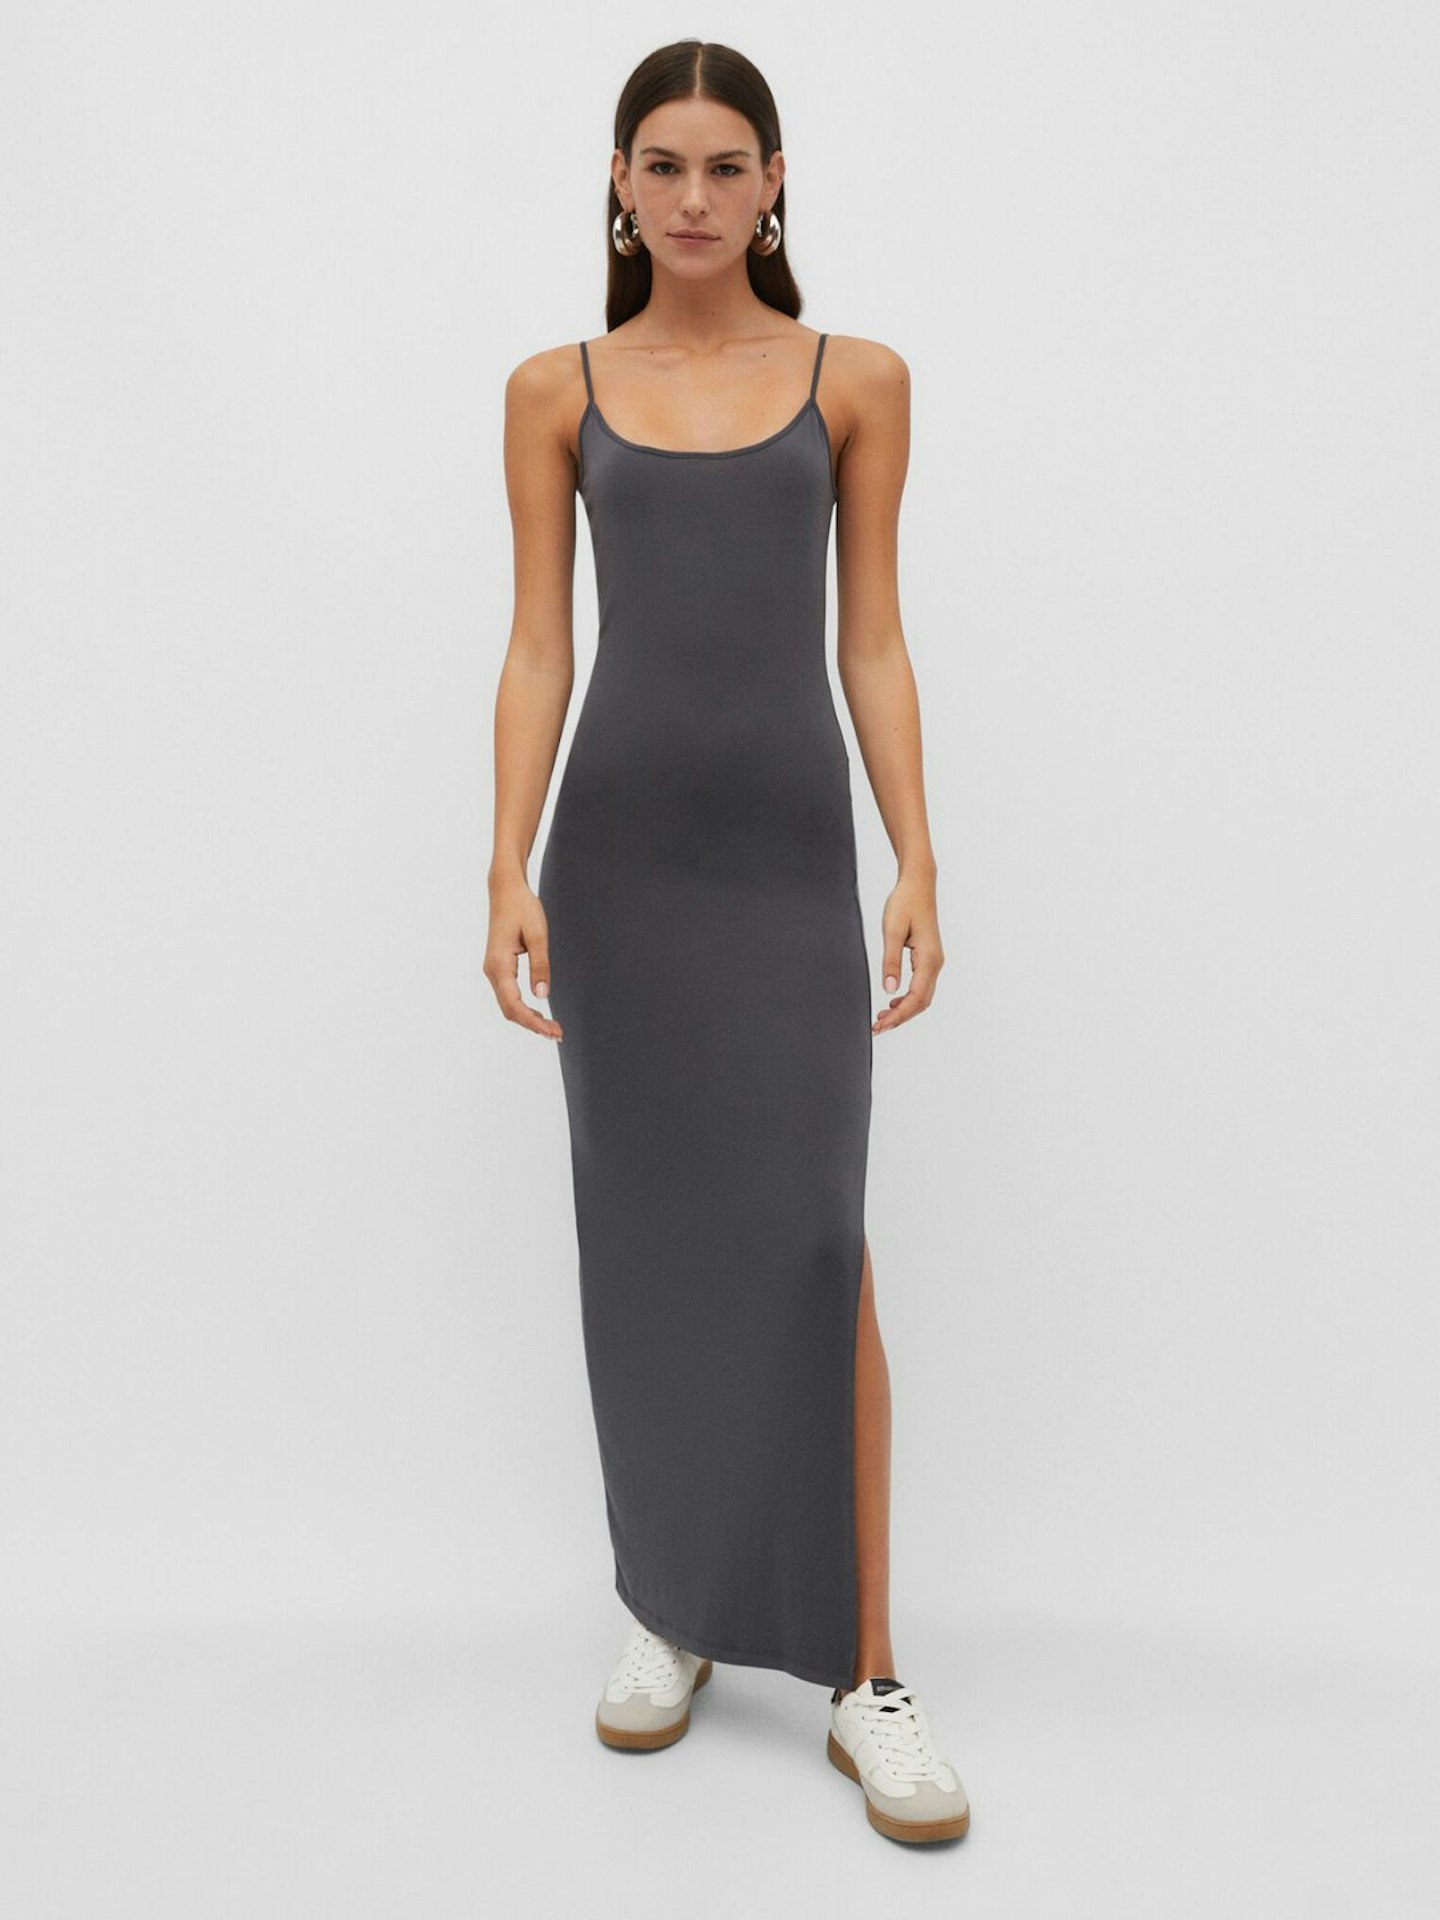 I'm a fashion fan - I found an incredible dupe for Kim's SKIMS